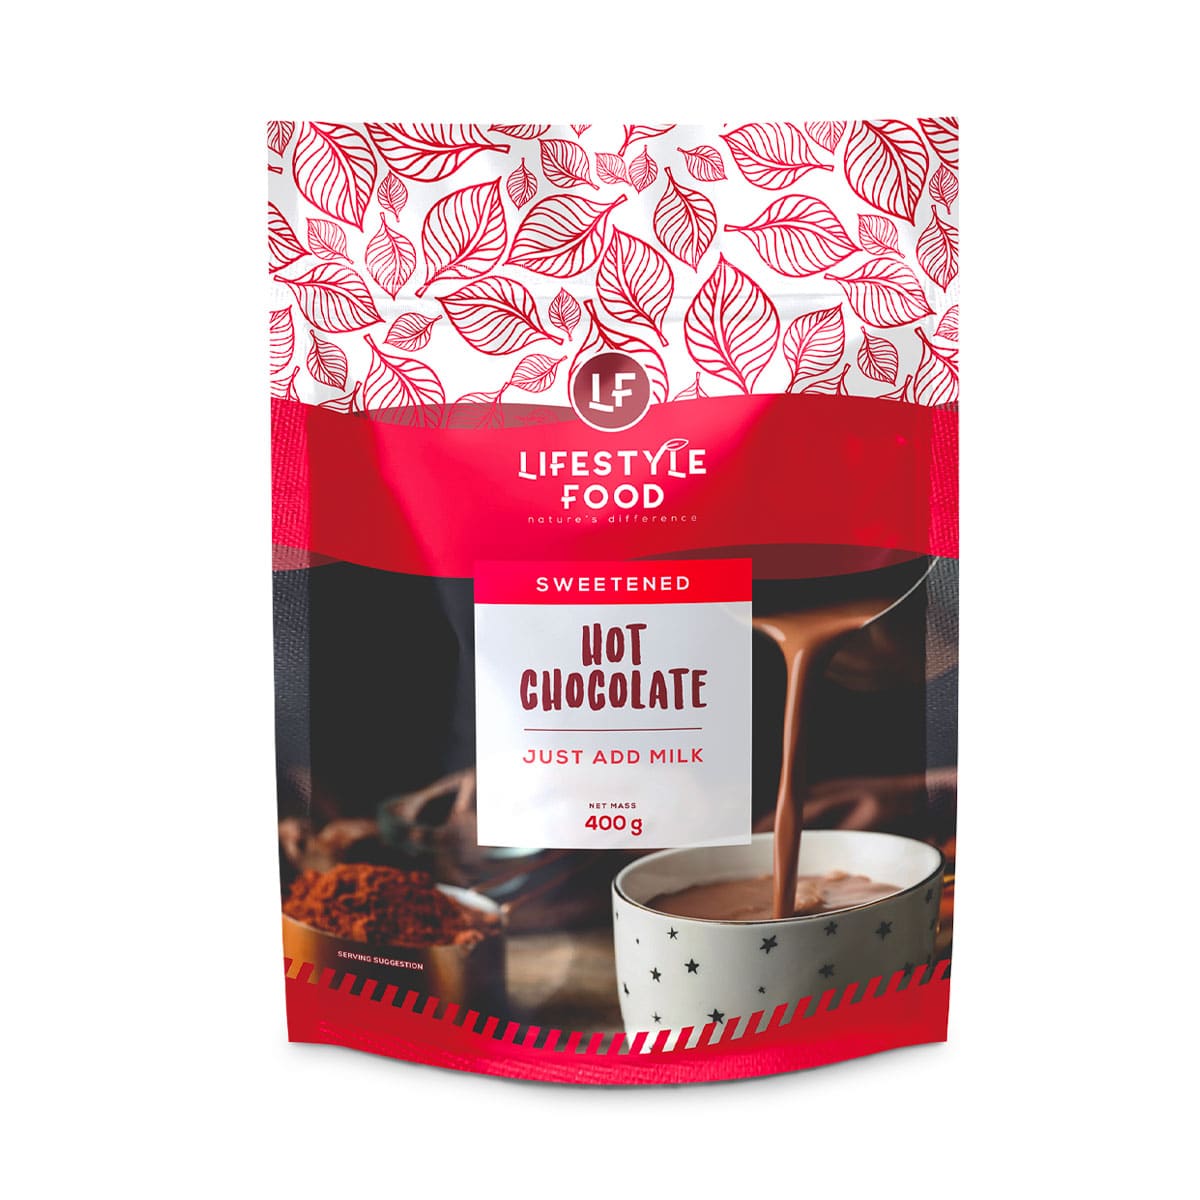 Lifestyle Food Sweetened Hot Chocolate Refill - 400g